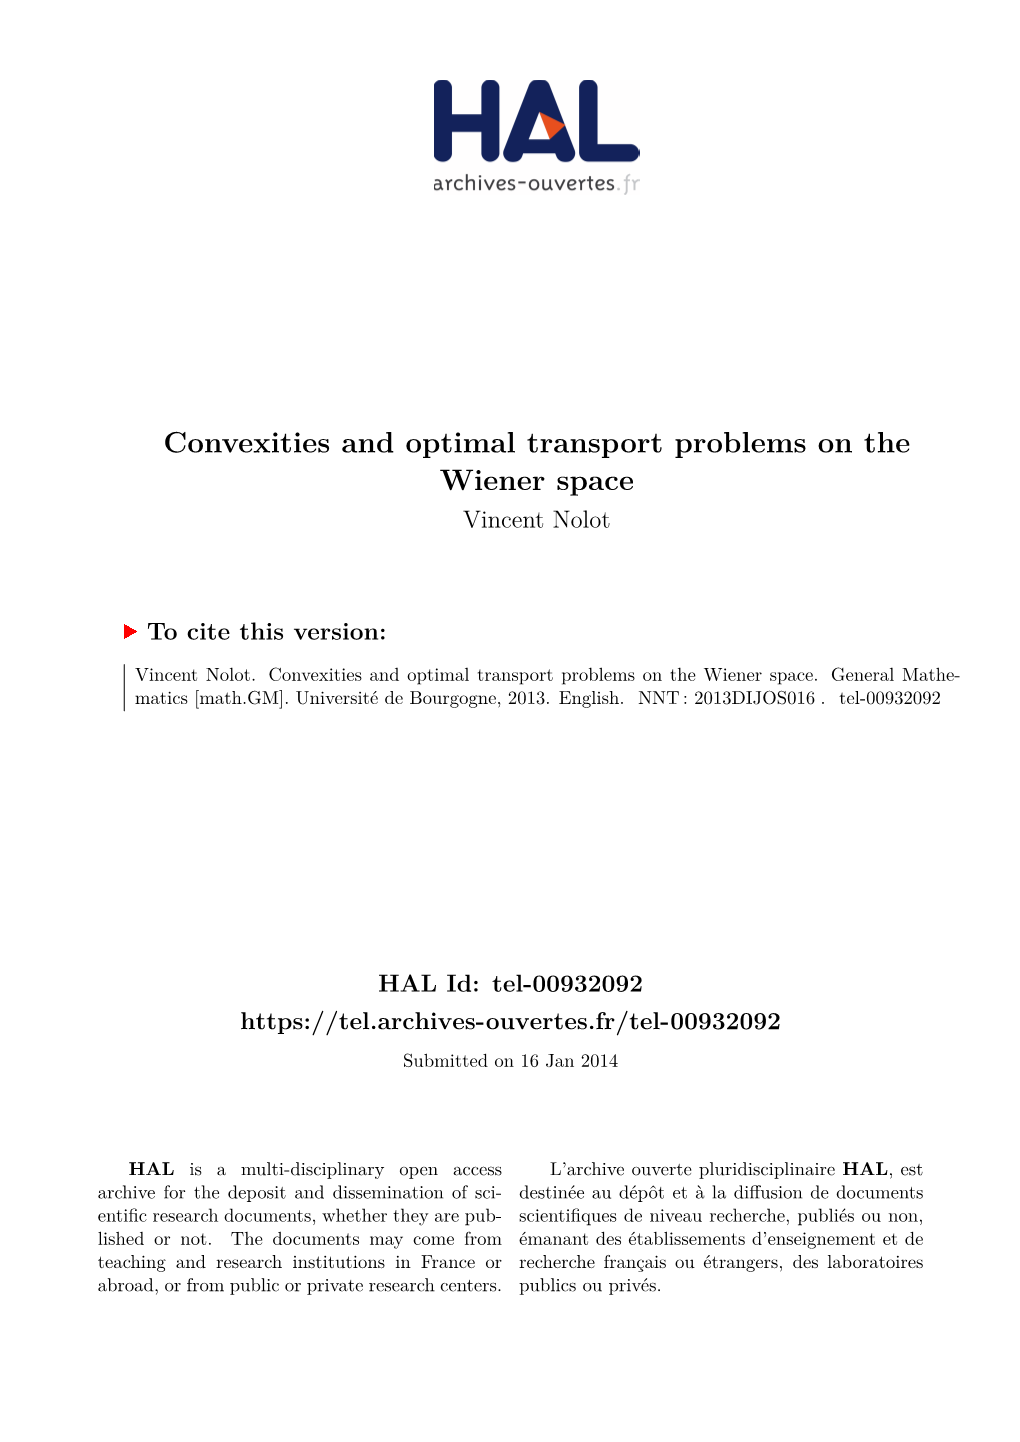 Convexities and Optimal Transport Problems on the Wiener Space Vincent Nolot